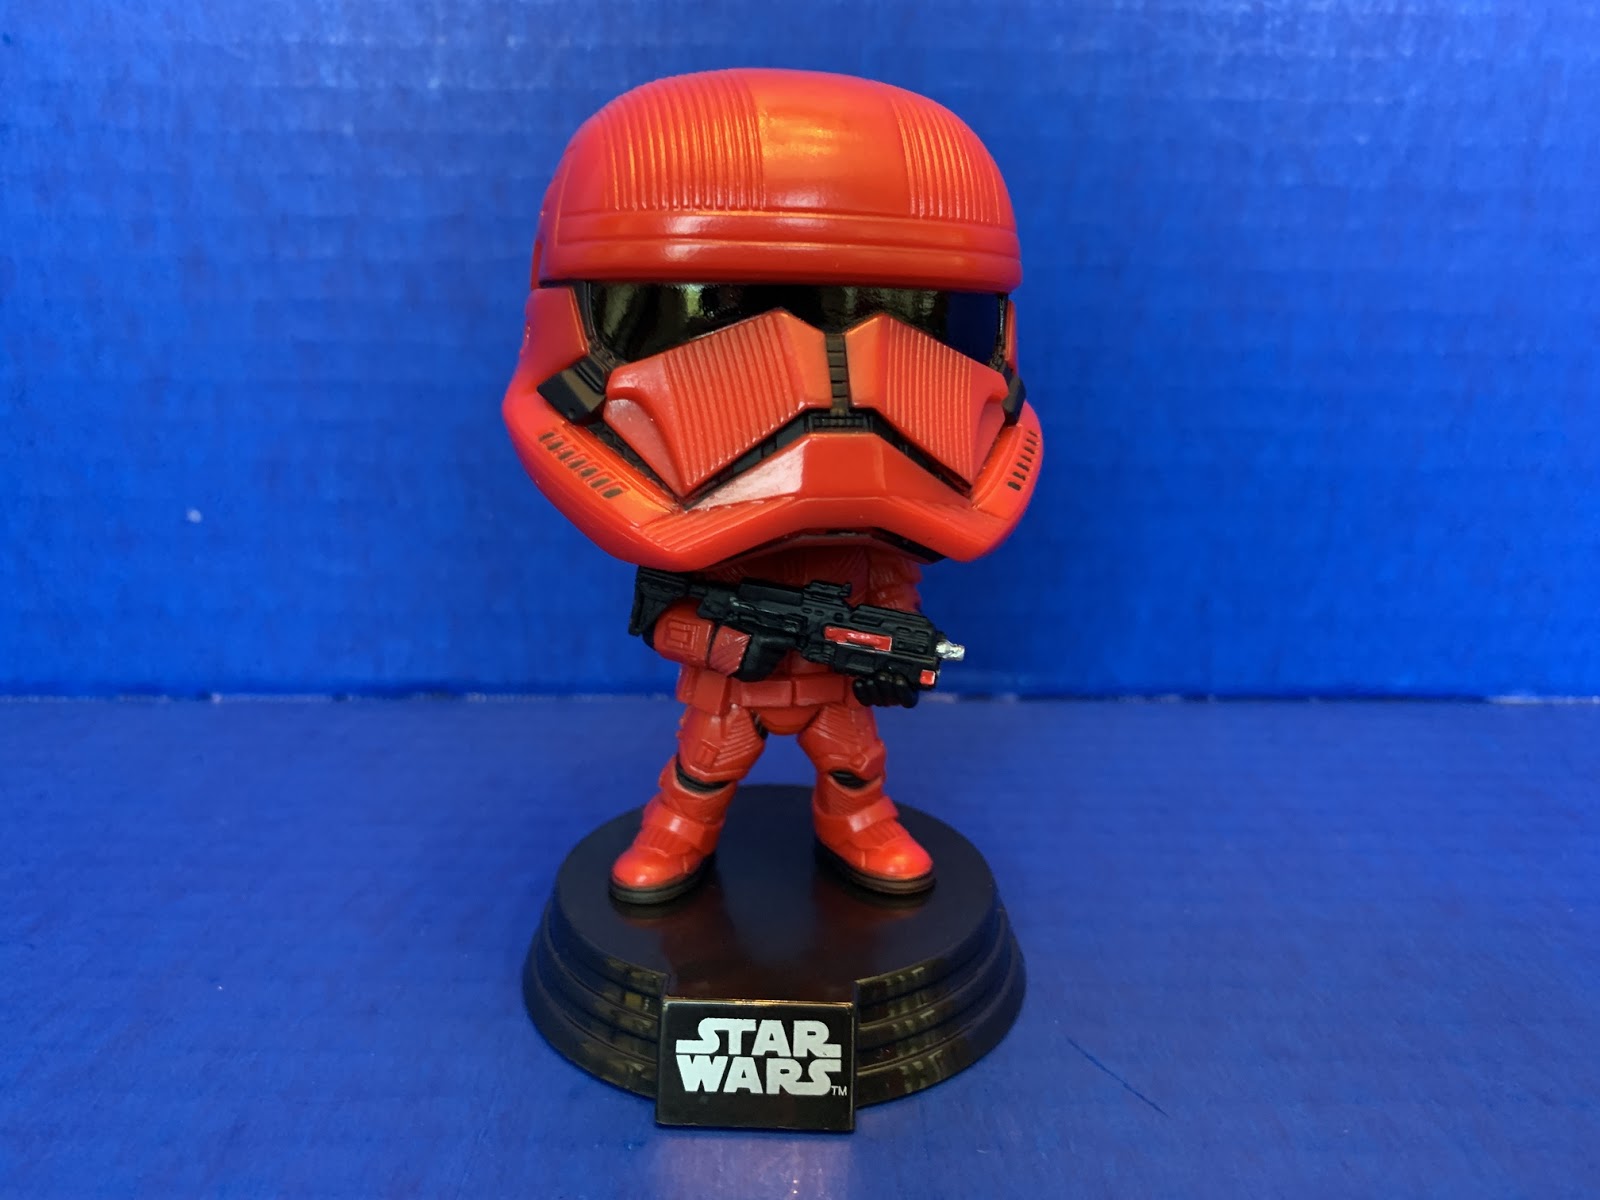 Sith Trooper Review